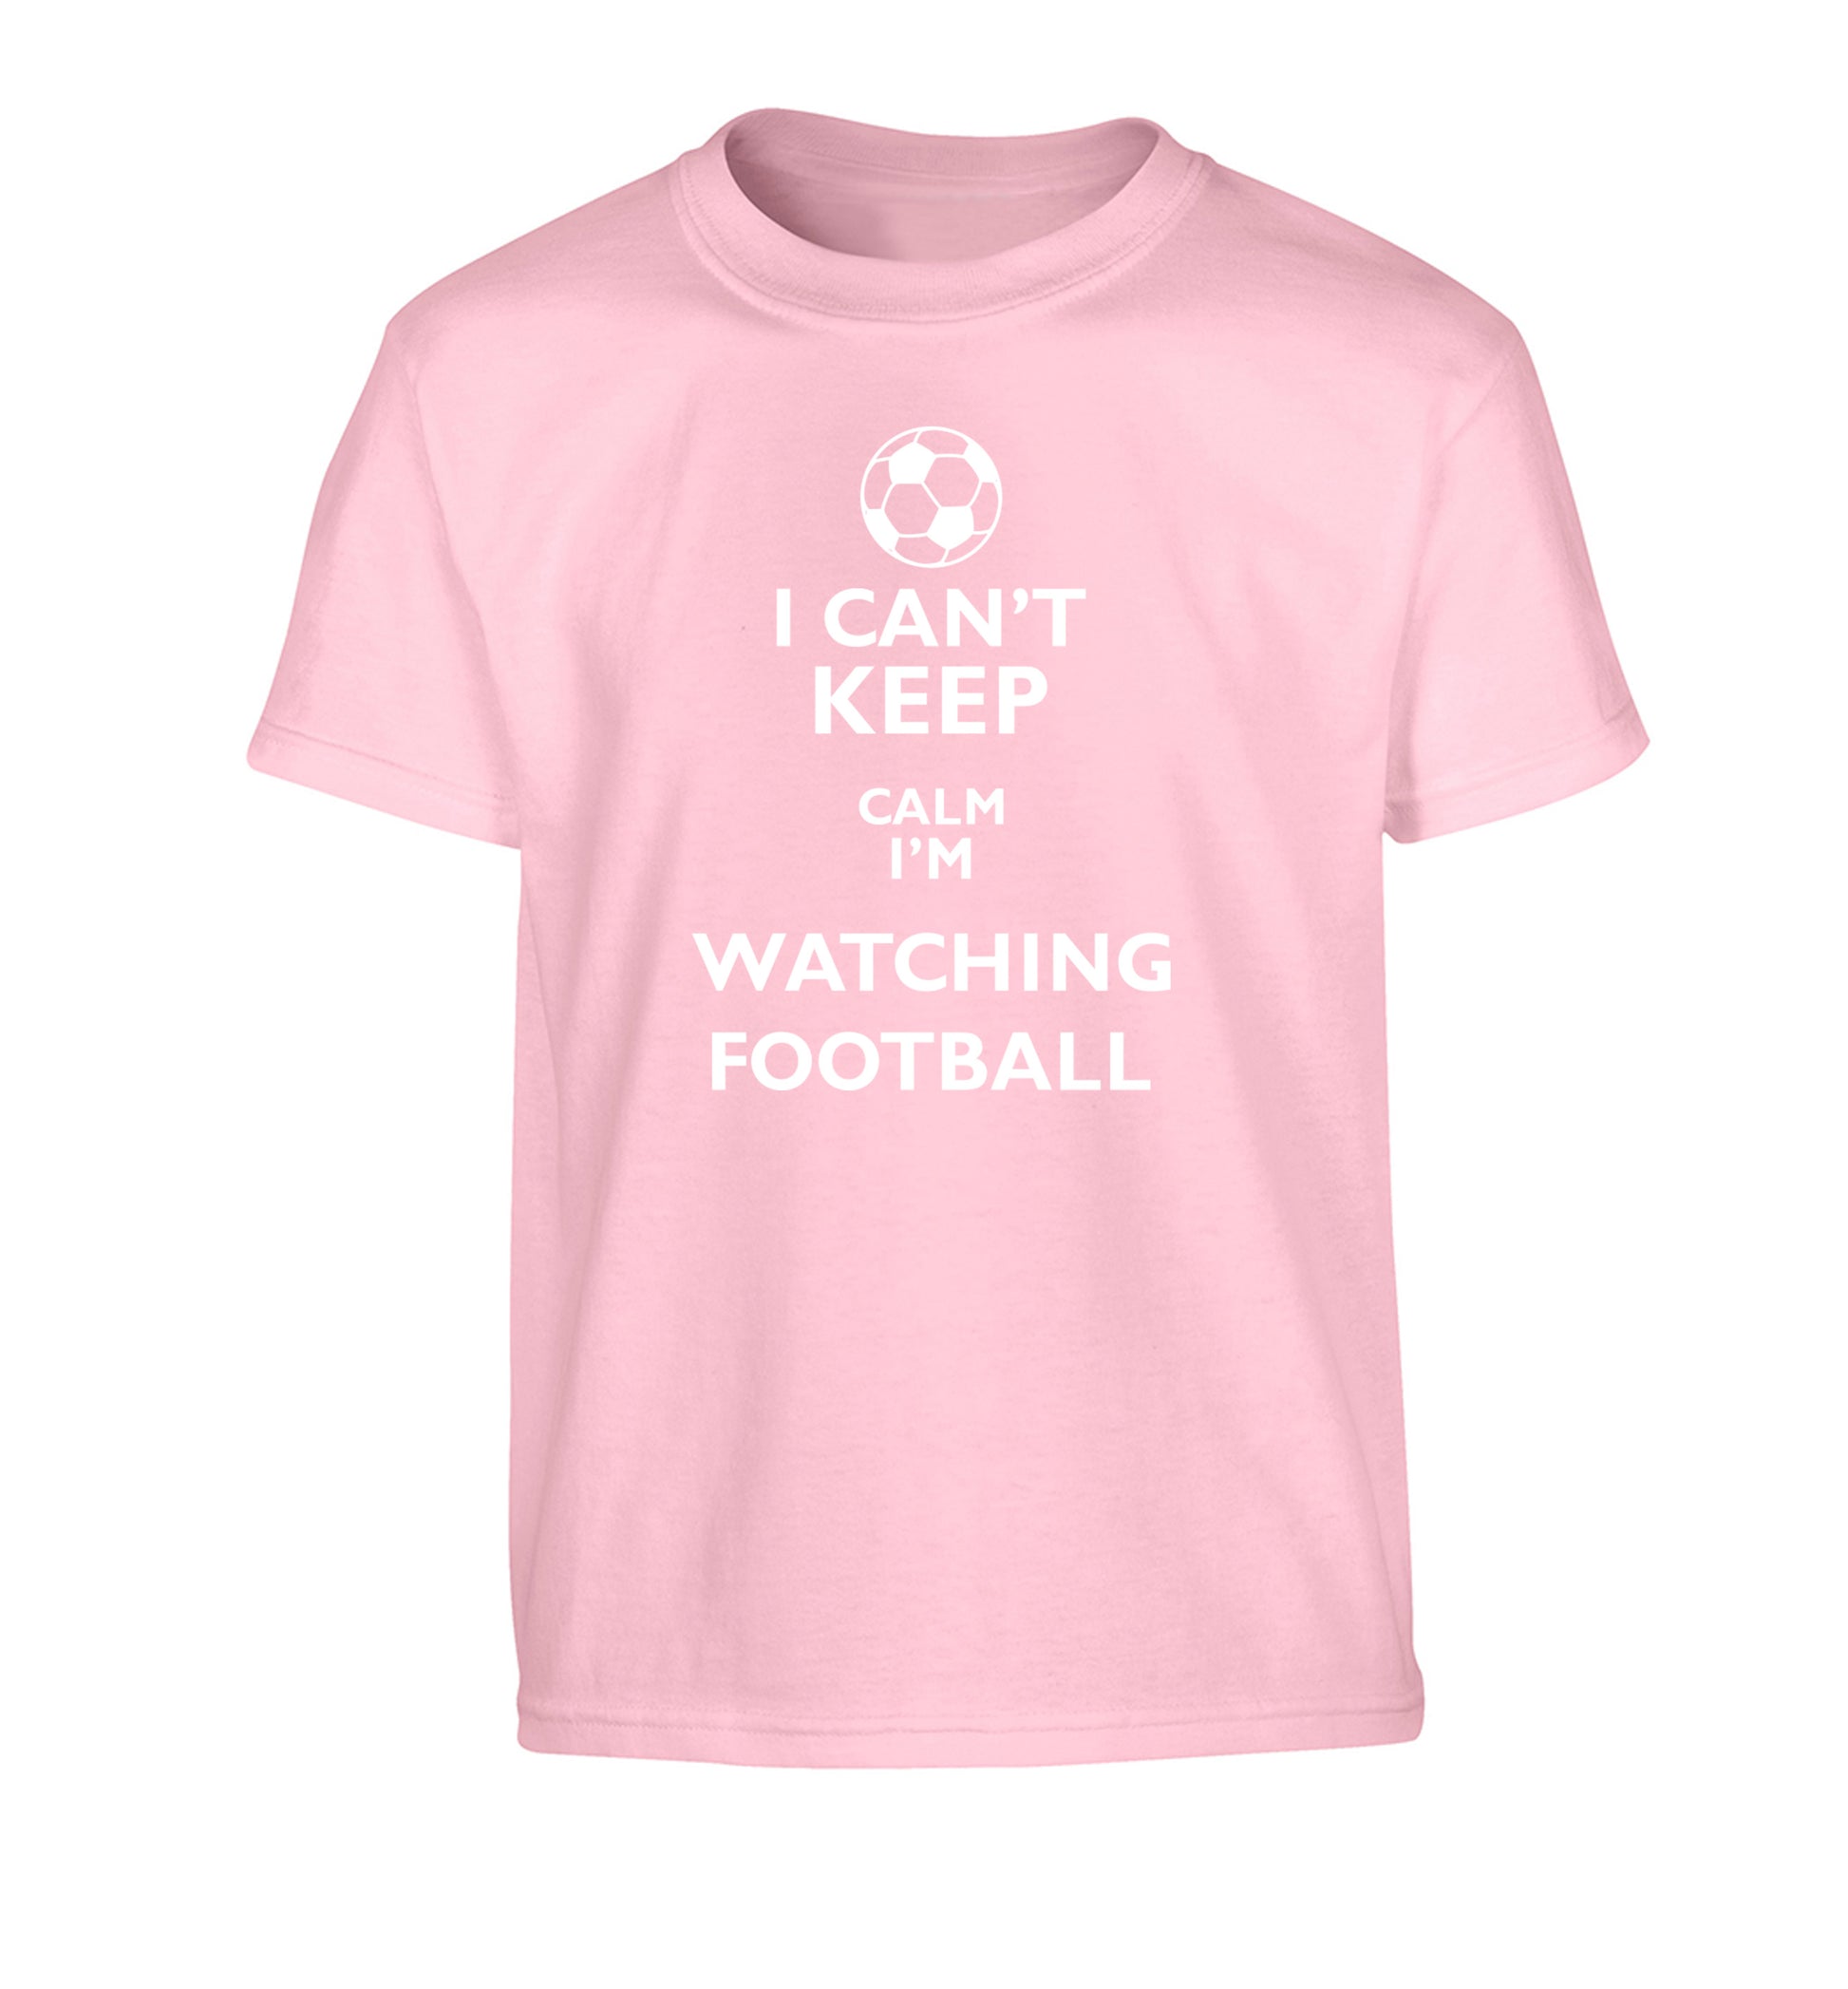 I can't keep calm I'm watching the football Children's light pink Tshirt 12-14 Years